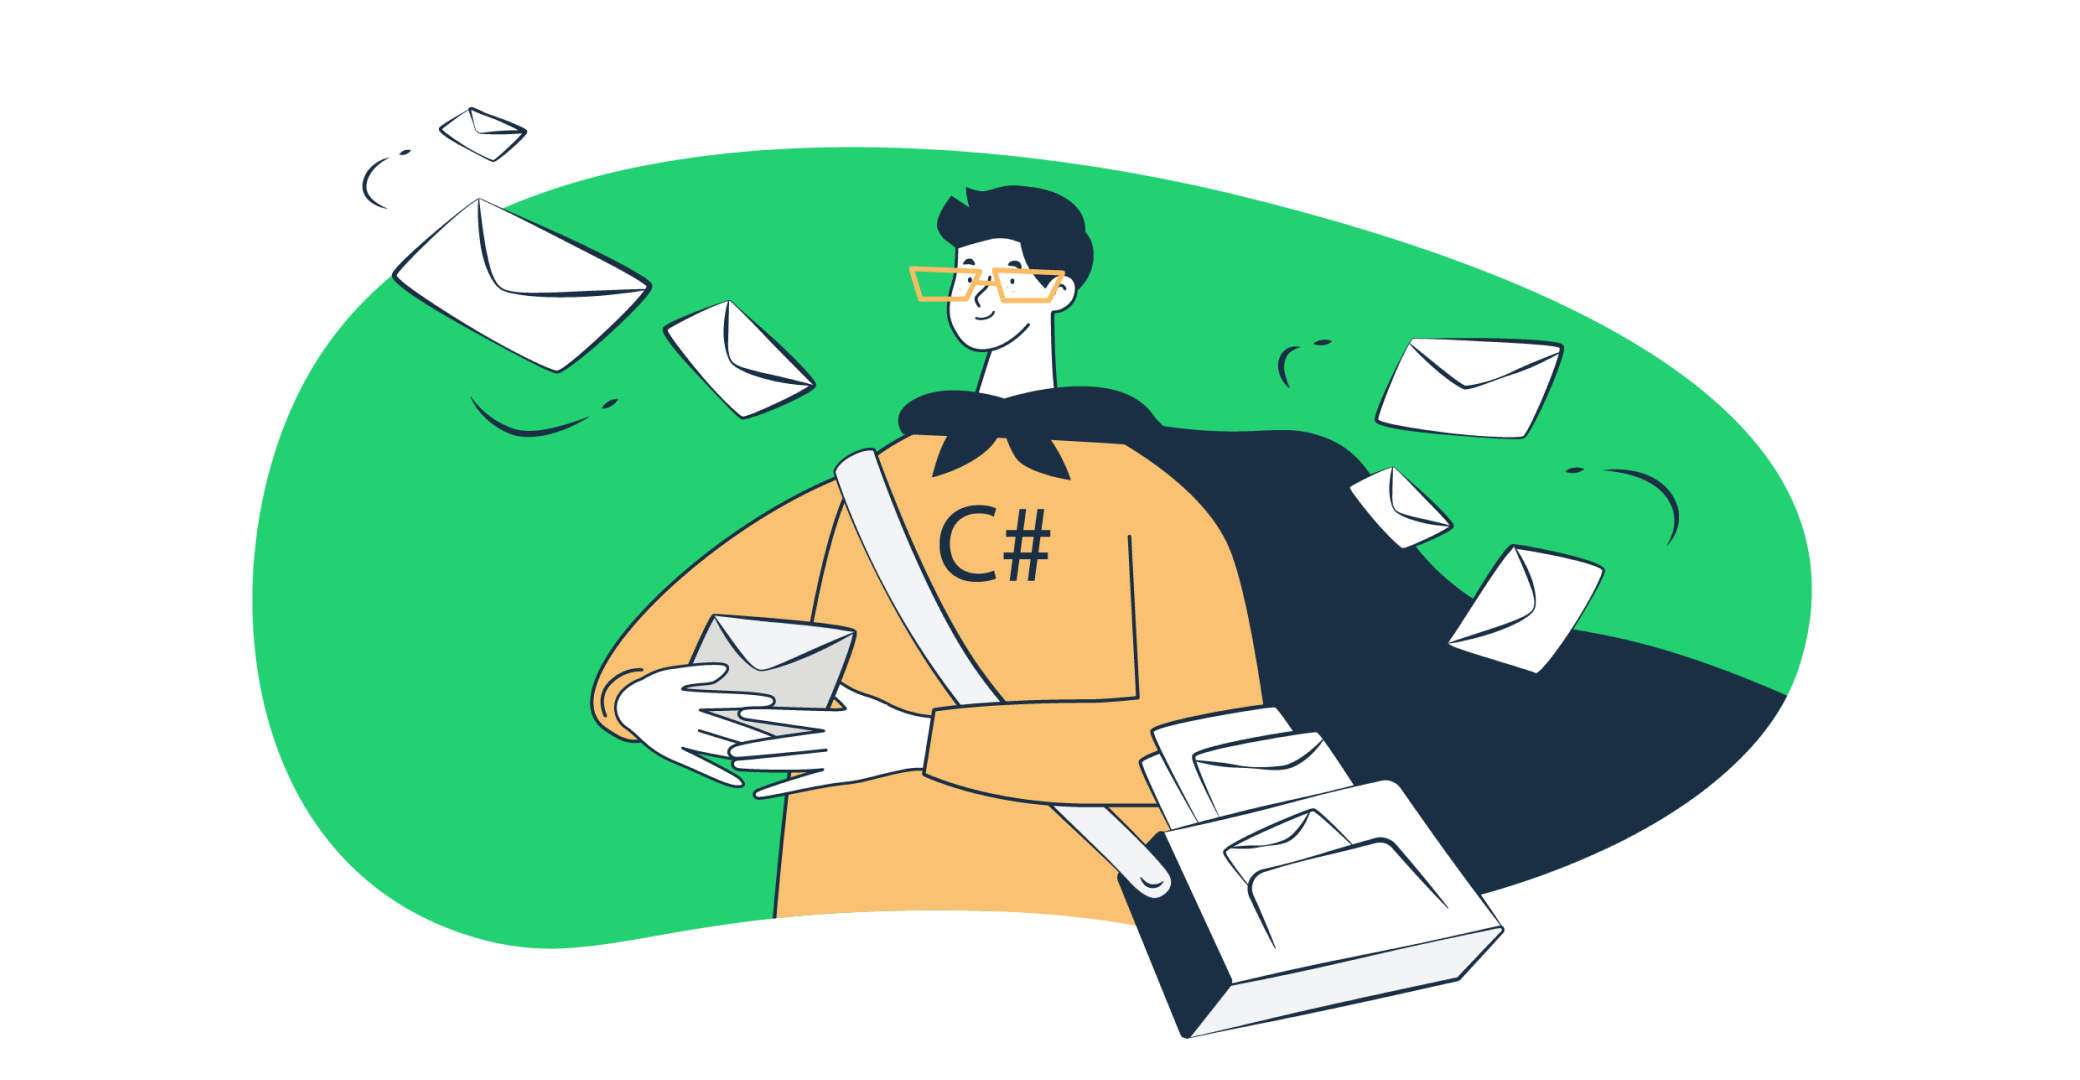 This is a featured image for an article on sending and receiving emails with C#